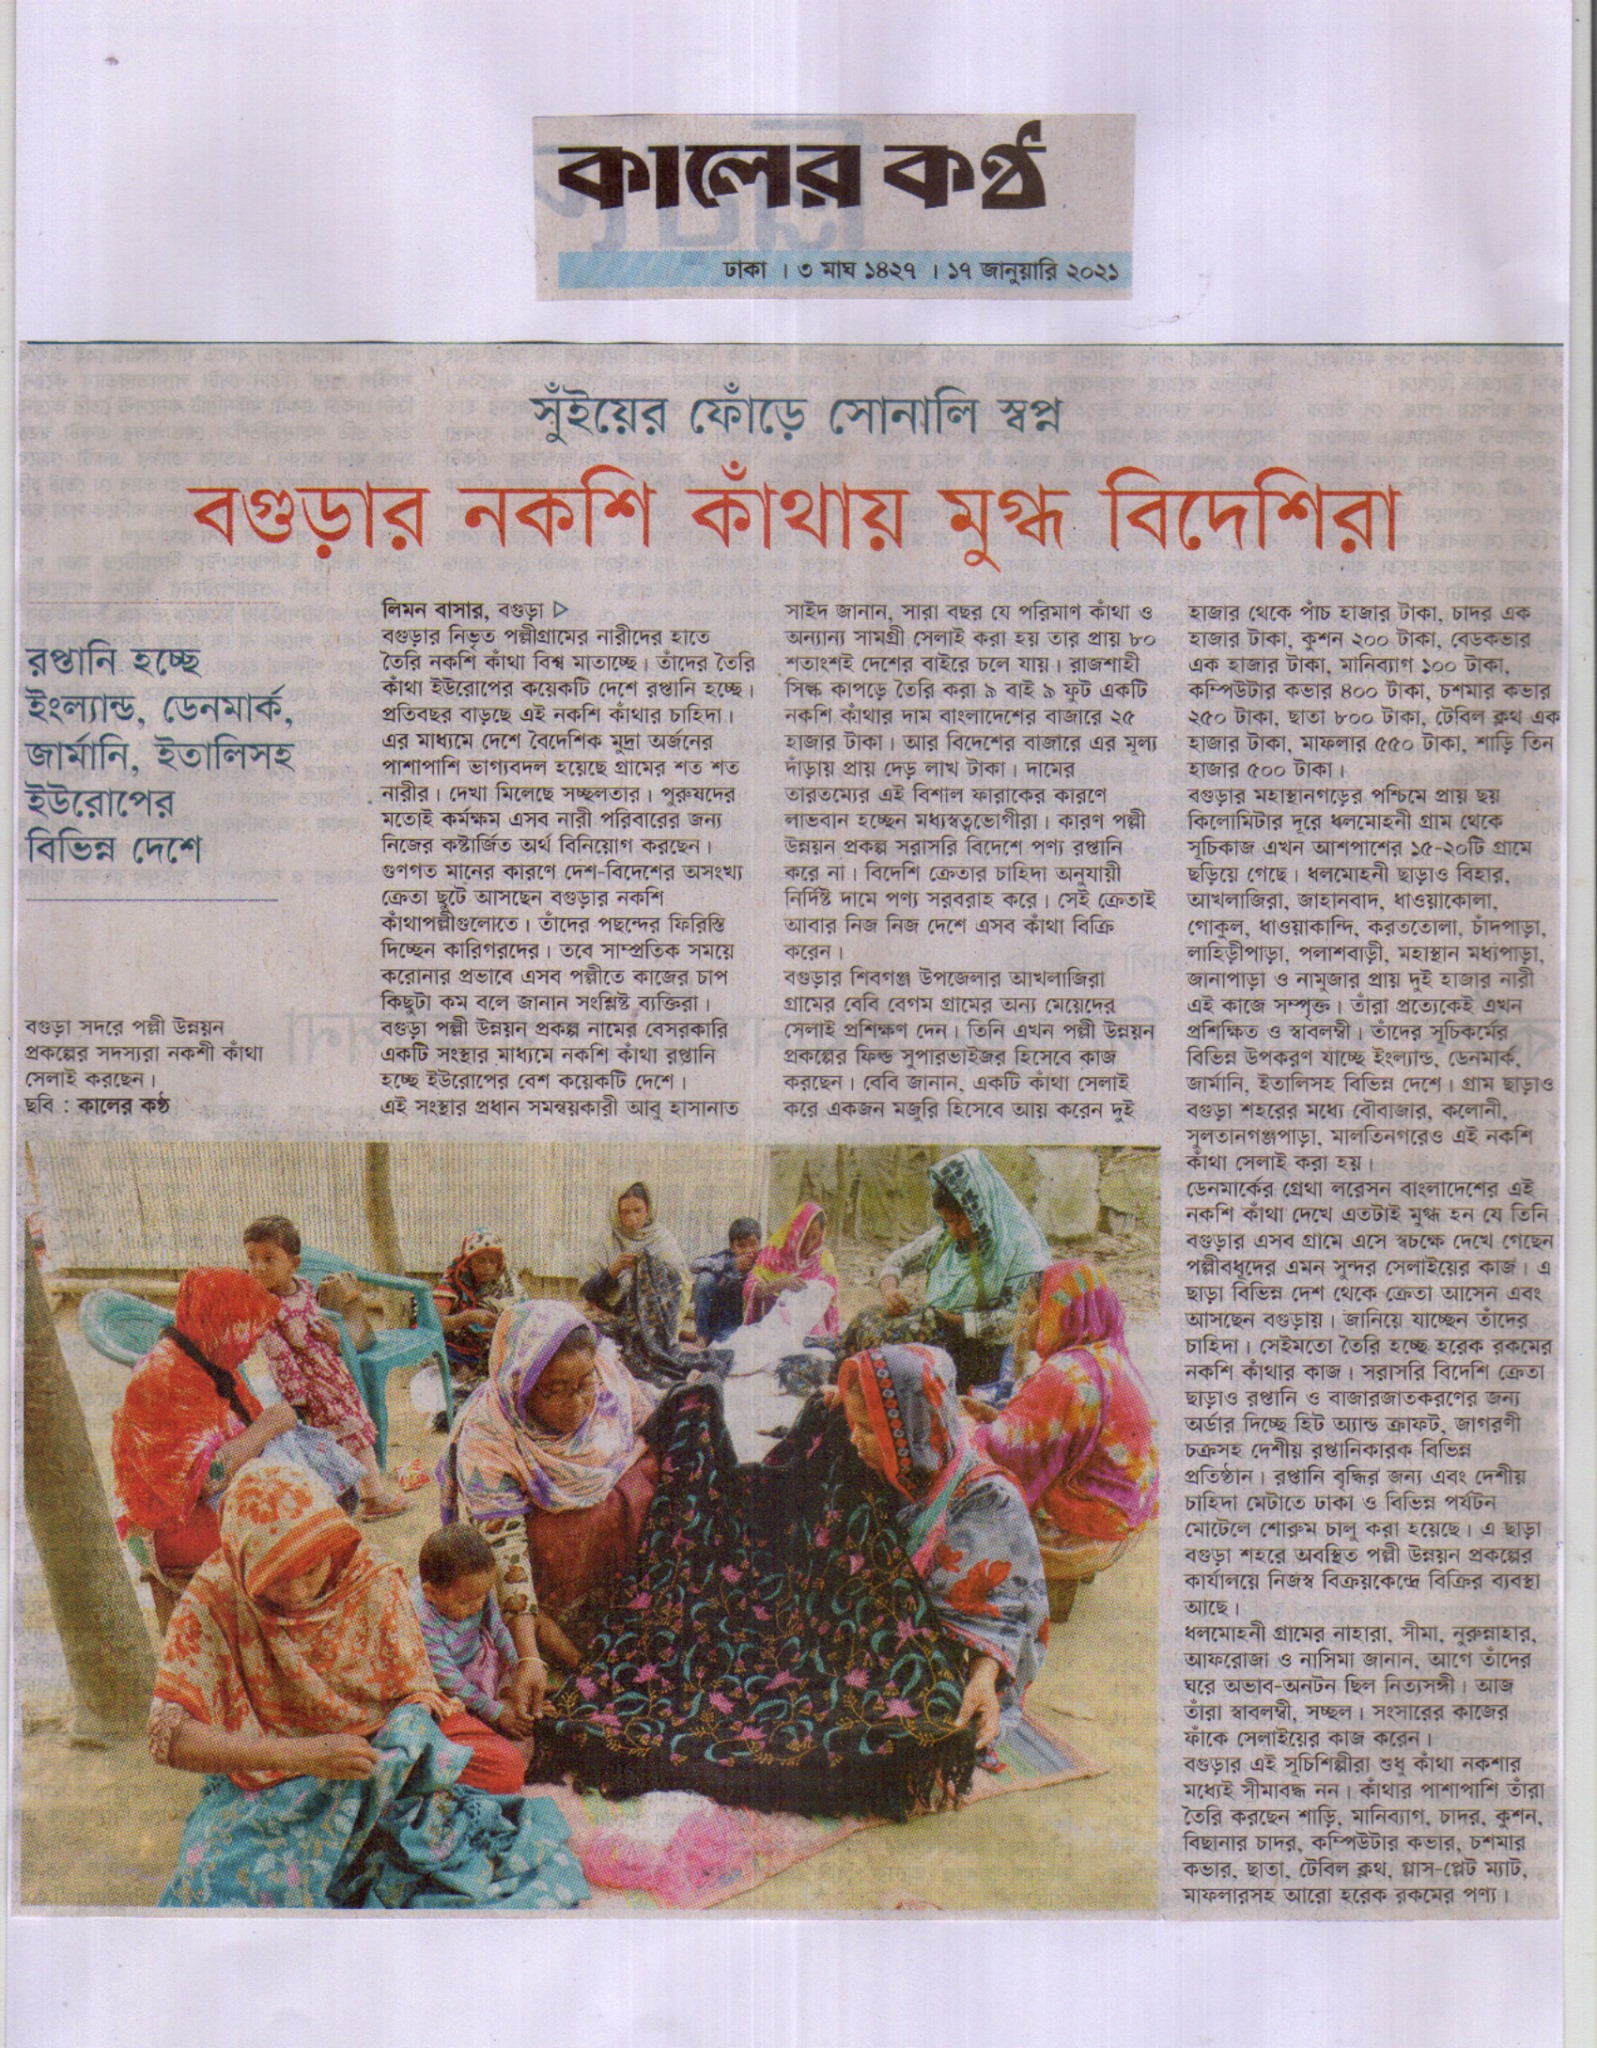 PUP Produced Nakshi Kantha Related News Published at National Newspaper - Pollee Unnyon Prokolpo - PUP